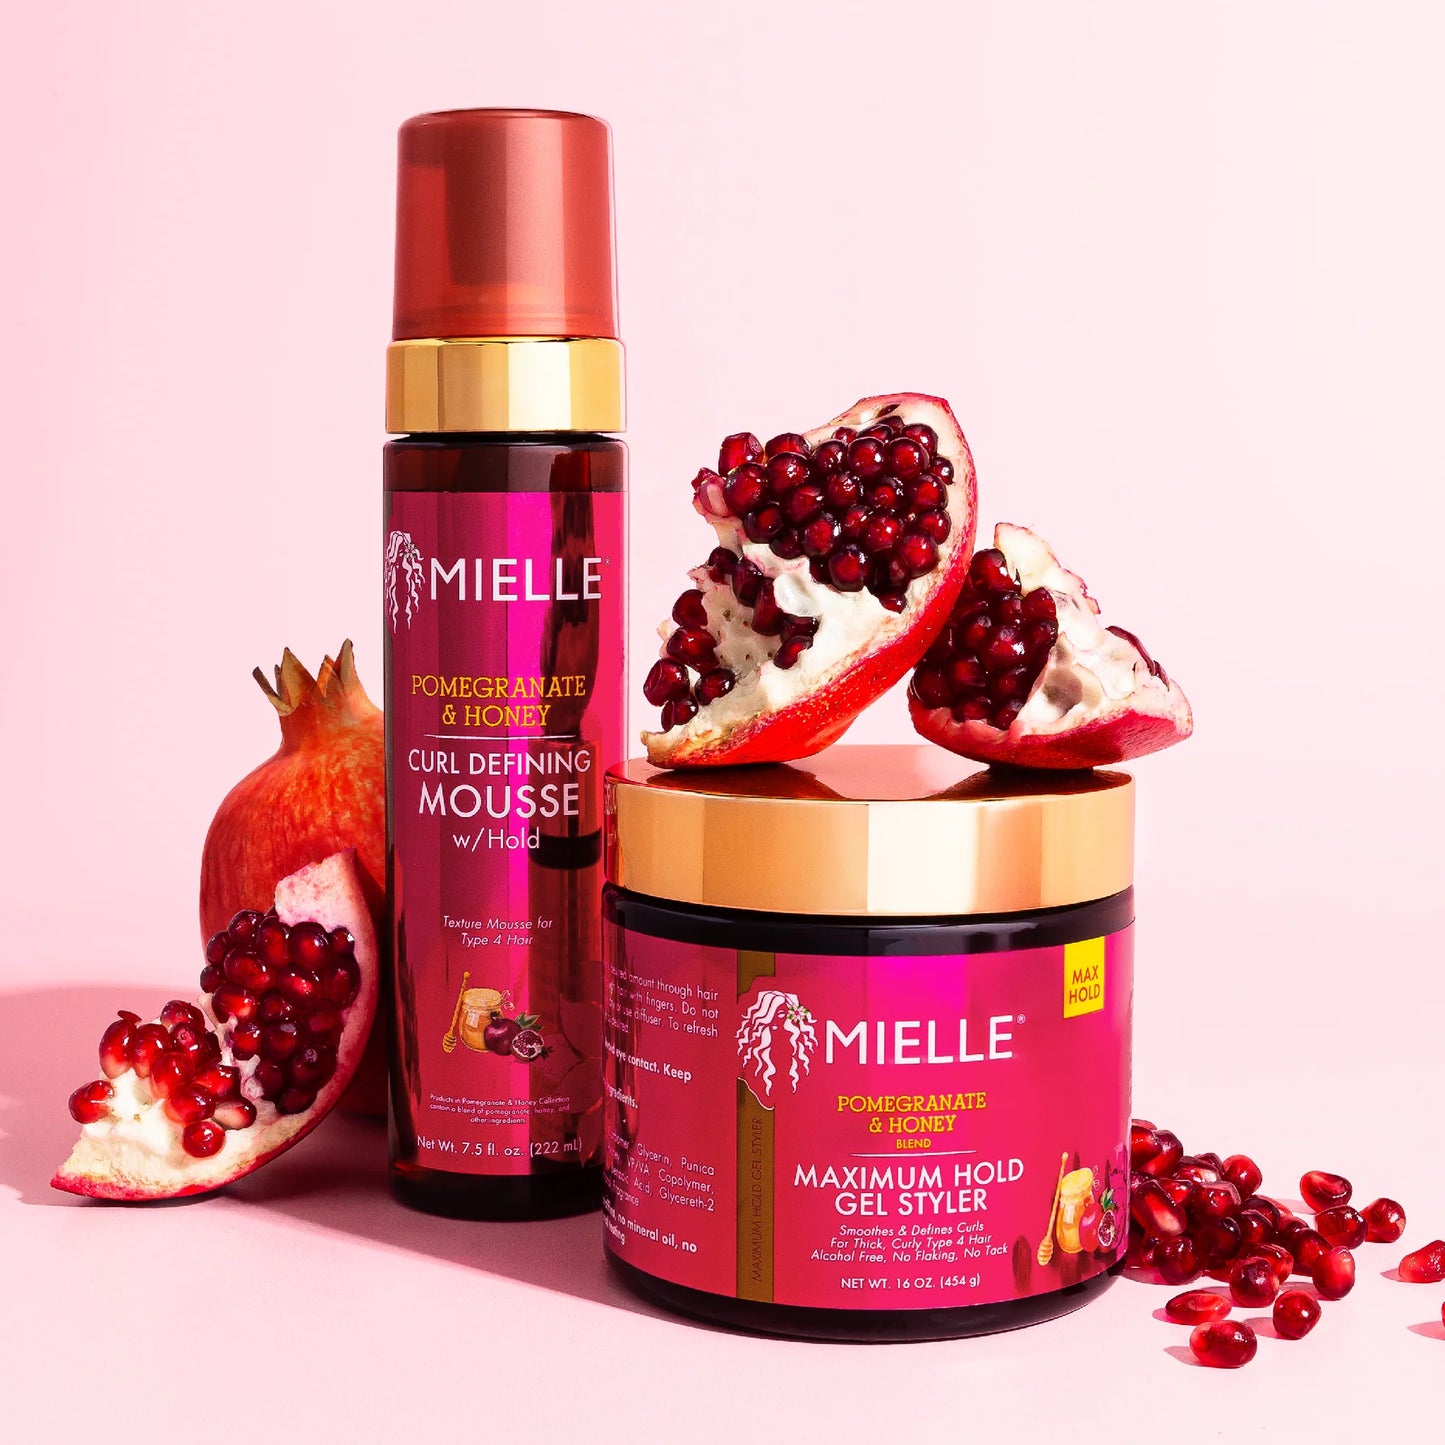 MIELLE ORGANICS Pomegranate & Honey Curl Defining Mousse with Hold